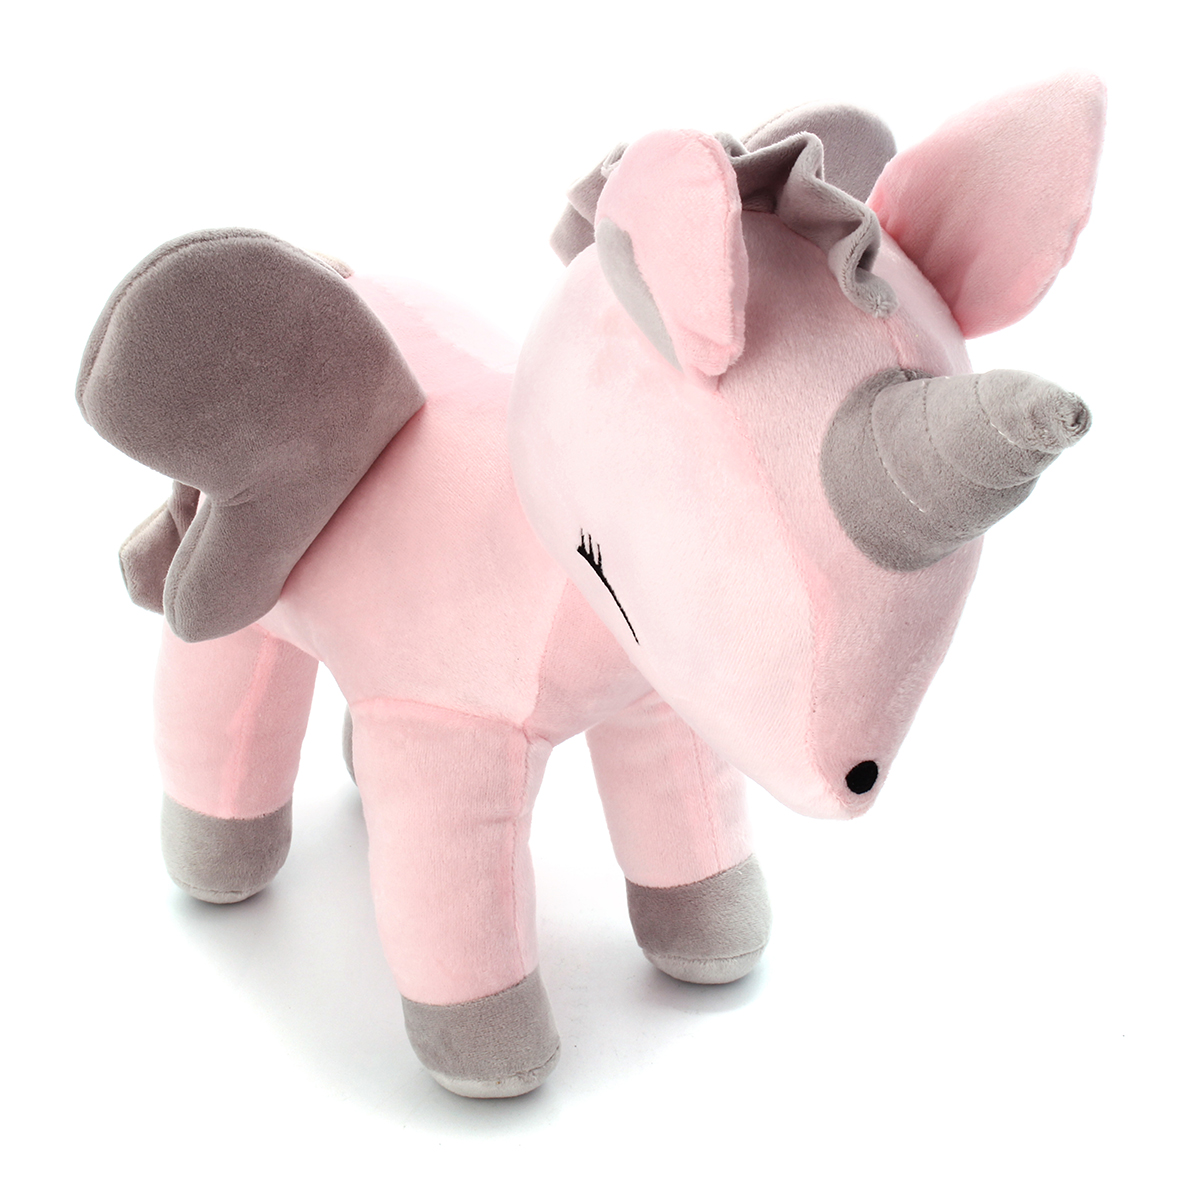 16-Inches-Soft-Giant-Unicorn-Stuffed-Plush-Toy-Animal-Doll-Children-Gifts-Photo-Props-Gift-1299365